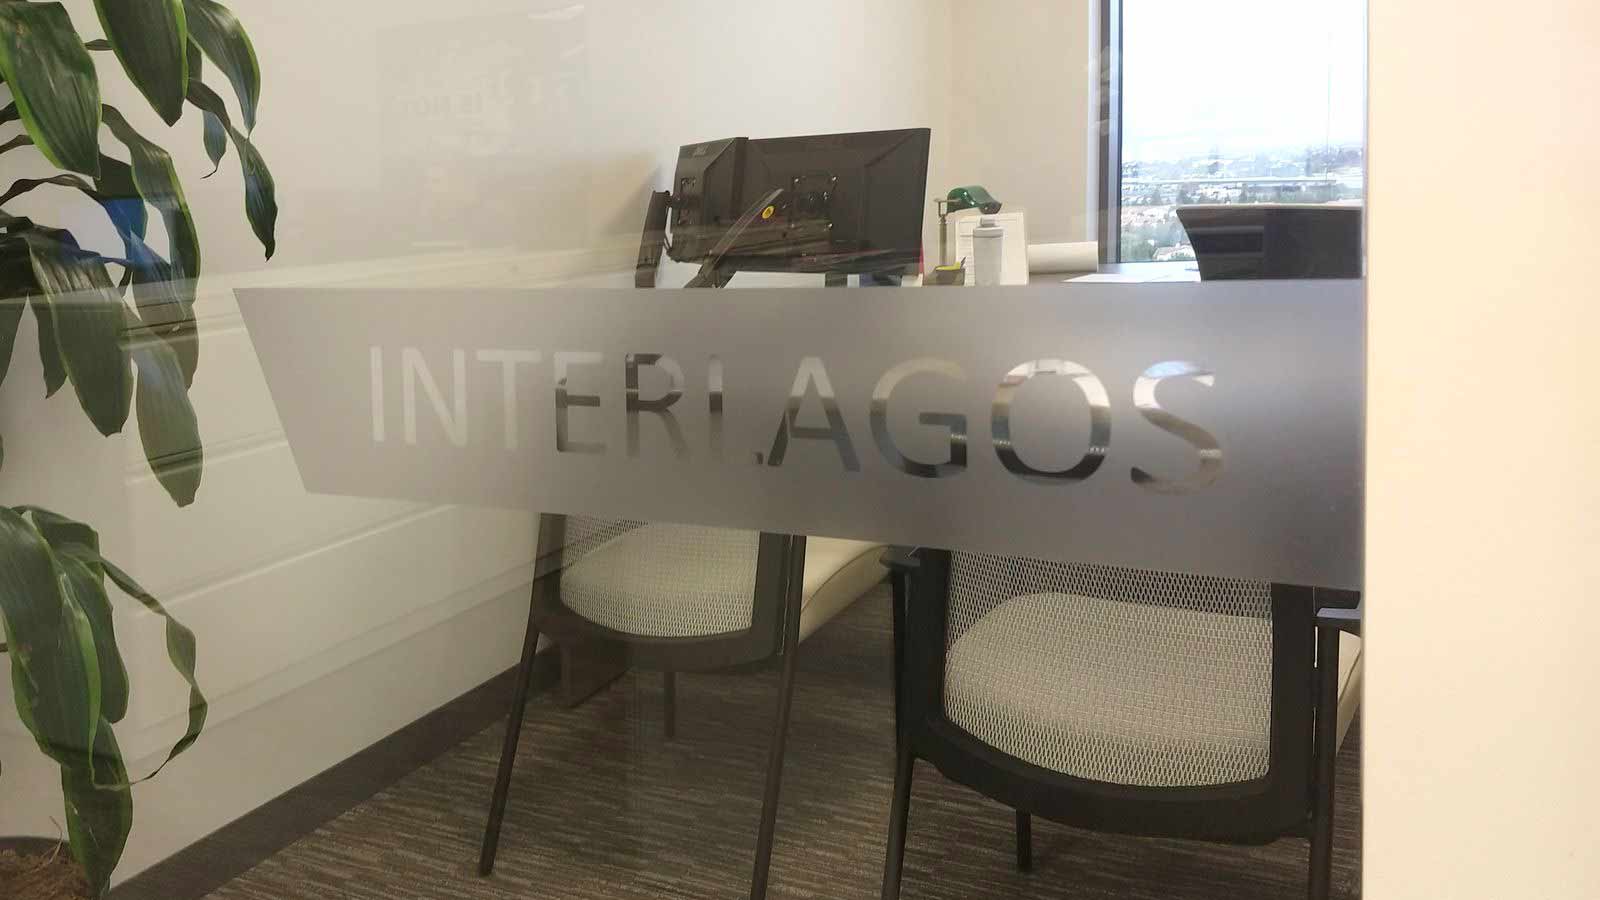 interlagos frosted glass decal